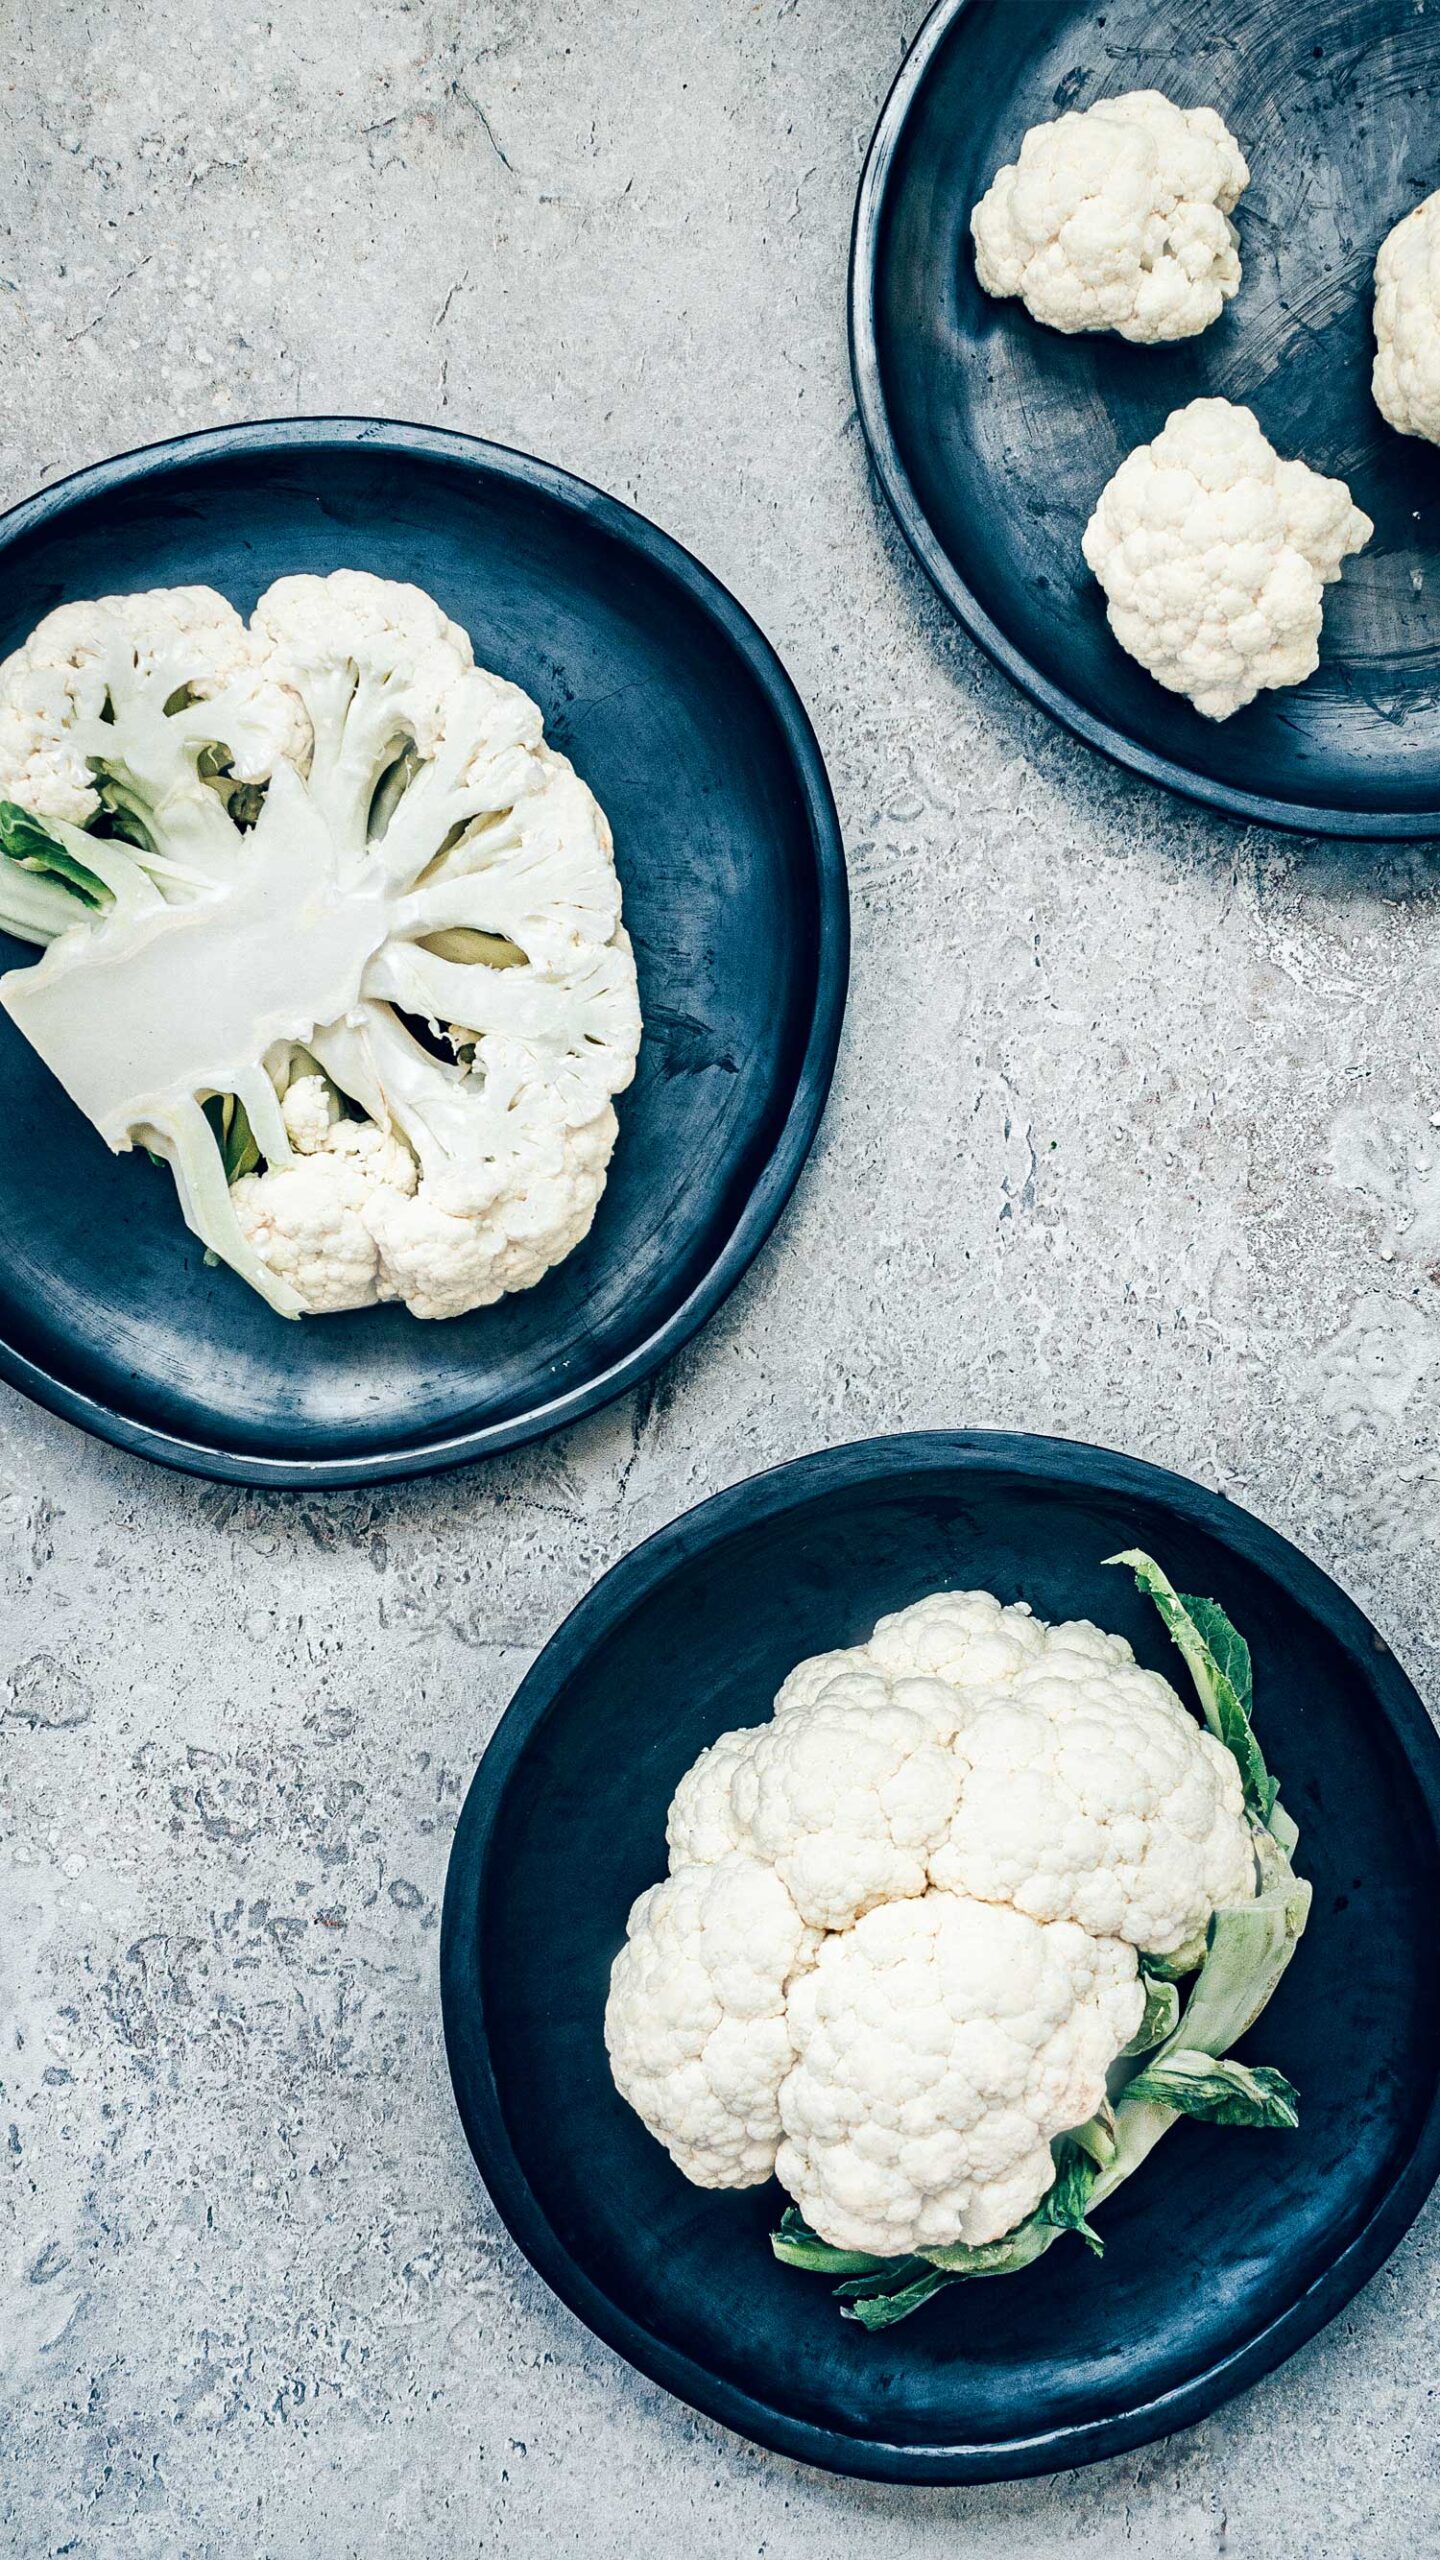 Black pottery plates on a stone background with raw cauliflower decoratively placed. Showing a whole head, individual florets, and a large slice.